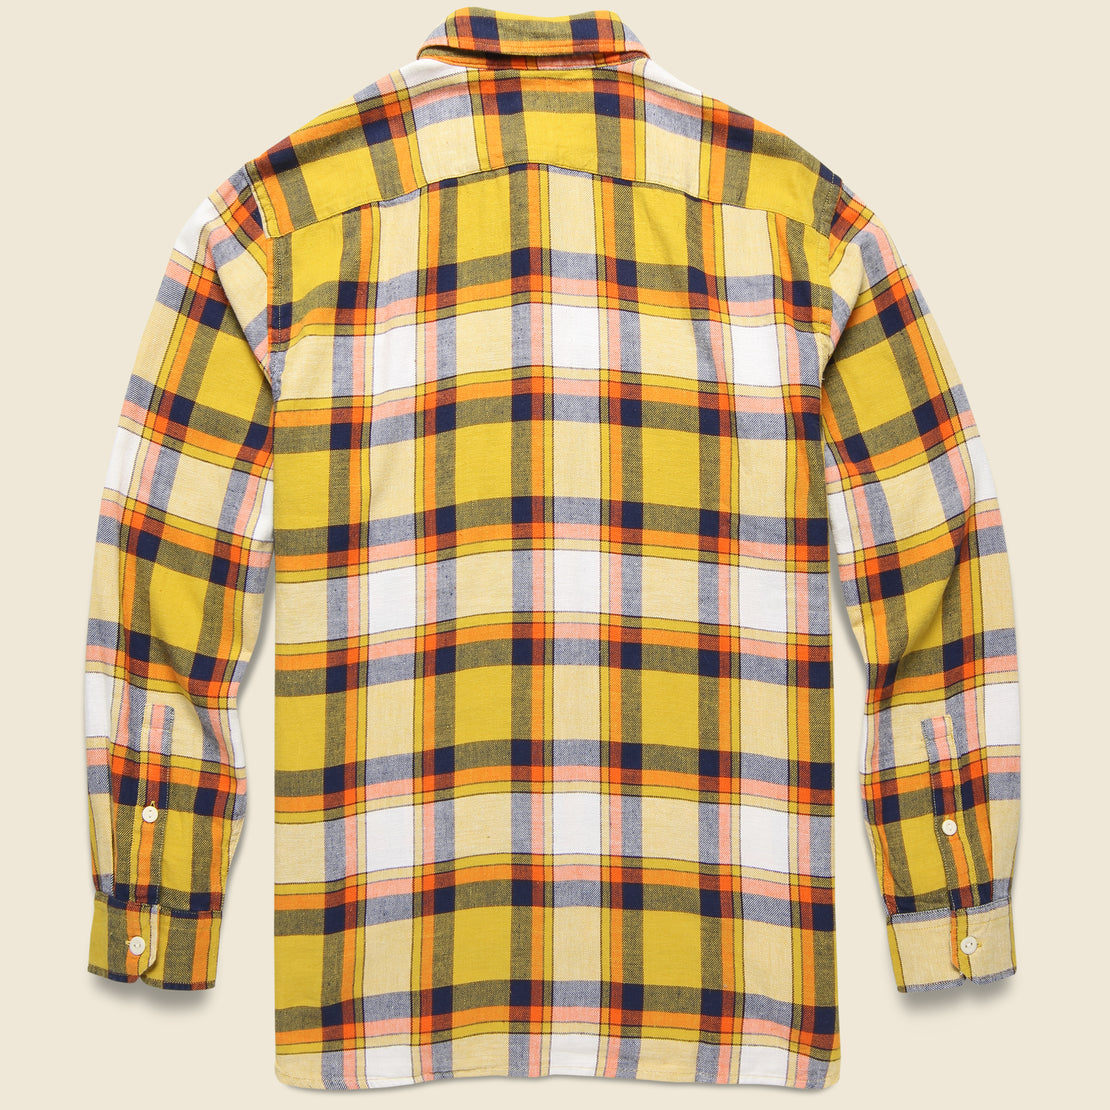 Jackson Worker Flannel Shirt - Grassquit Cool Yellow - Levis Premium - STAG Provisions - Tops - L/S Woven - Plaid